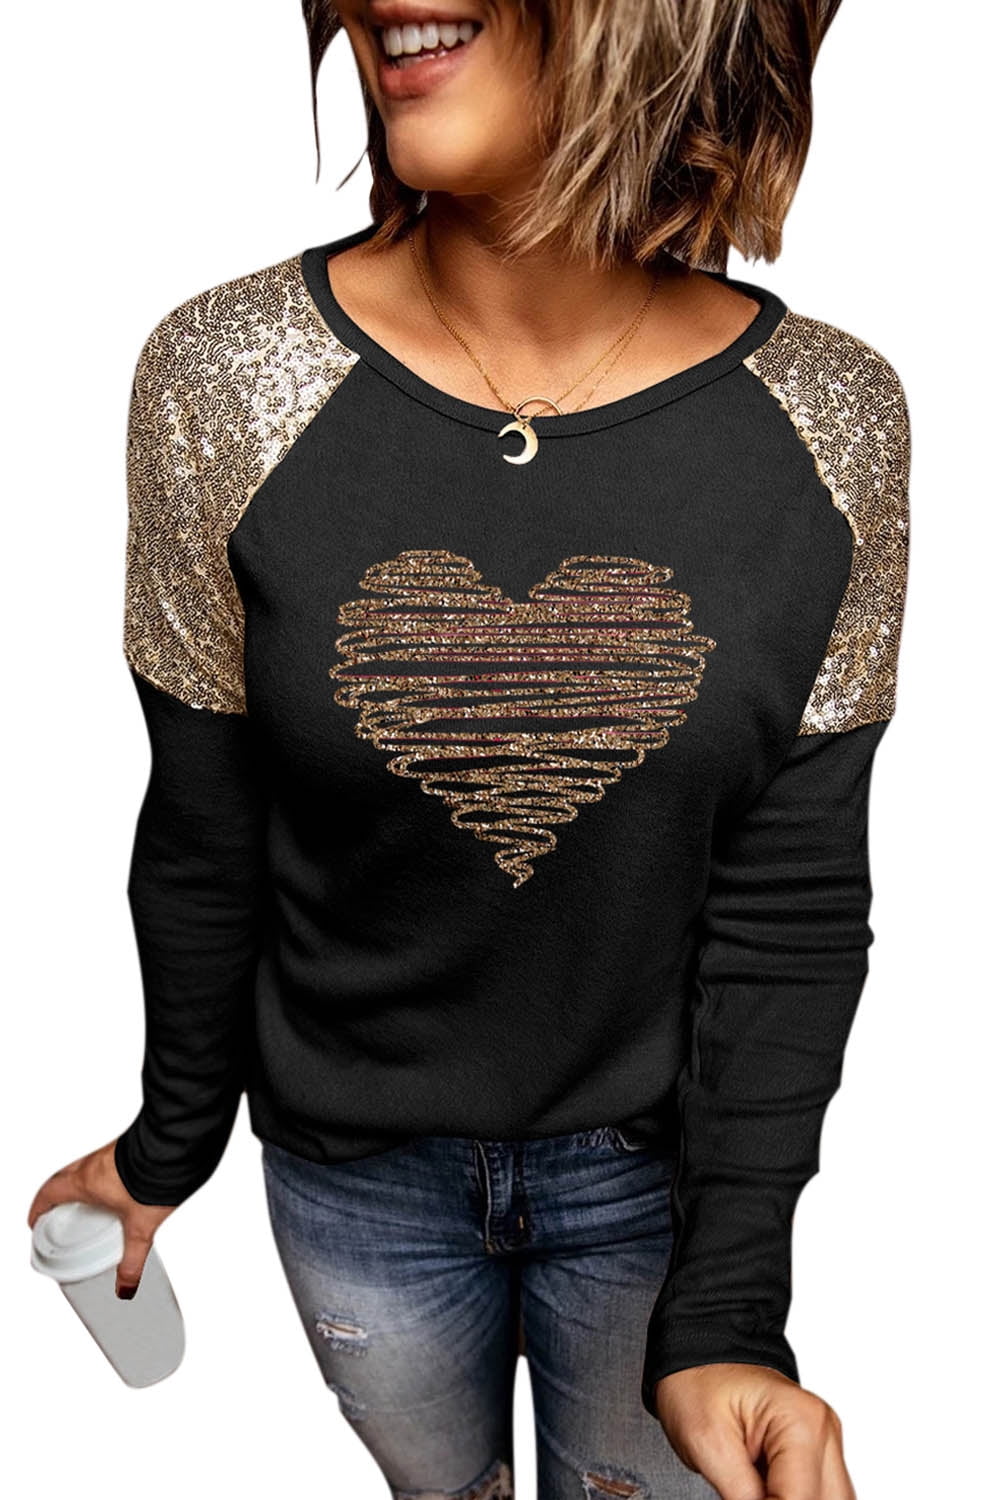 Women's Love Heart Printed T Shirt Round Neck Short Sleeve Tie-dye Tops Valentine's Day Casual Pullover Tunic Blouse 